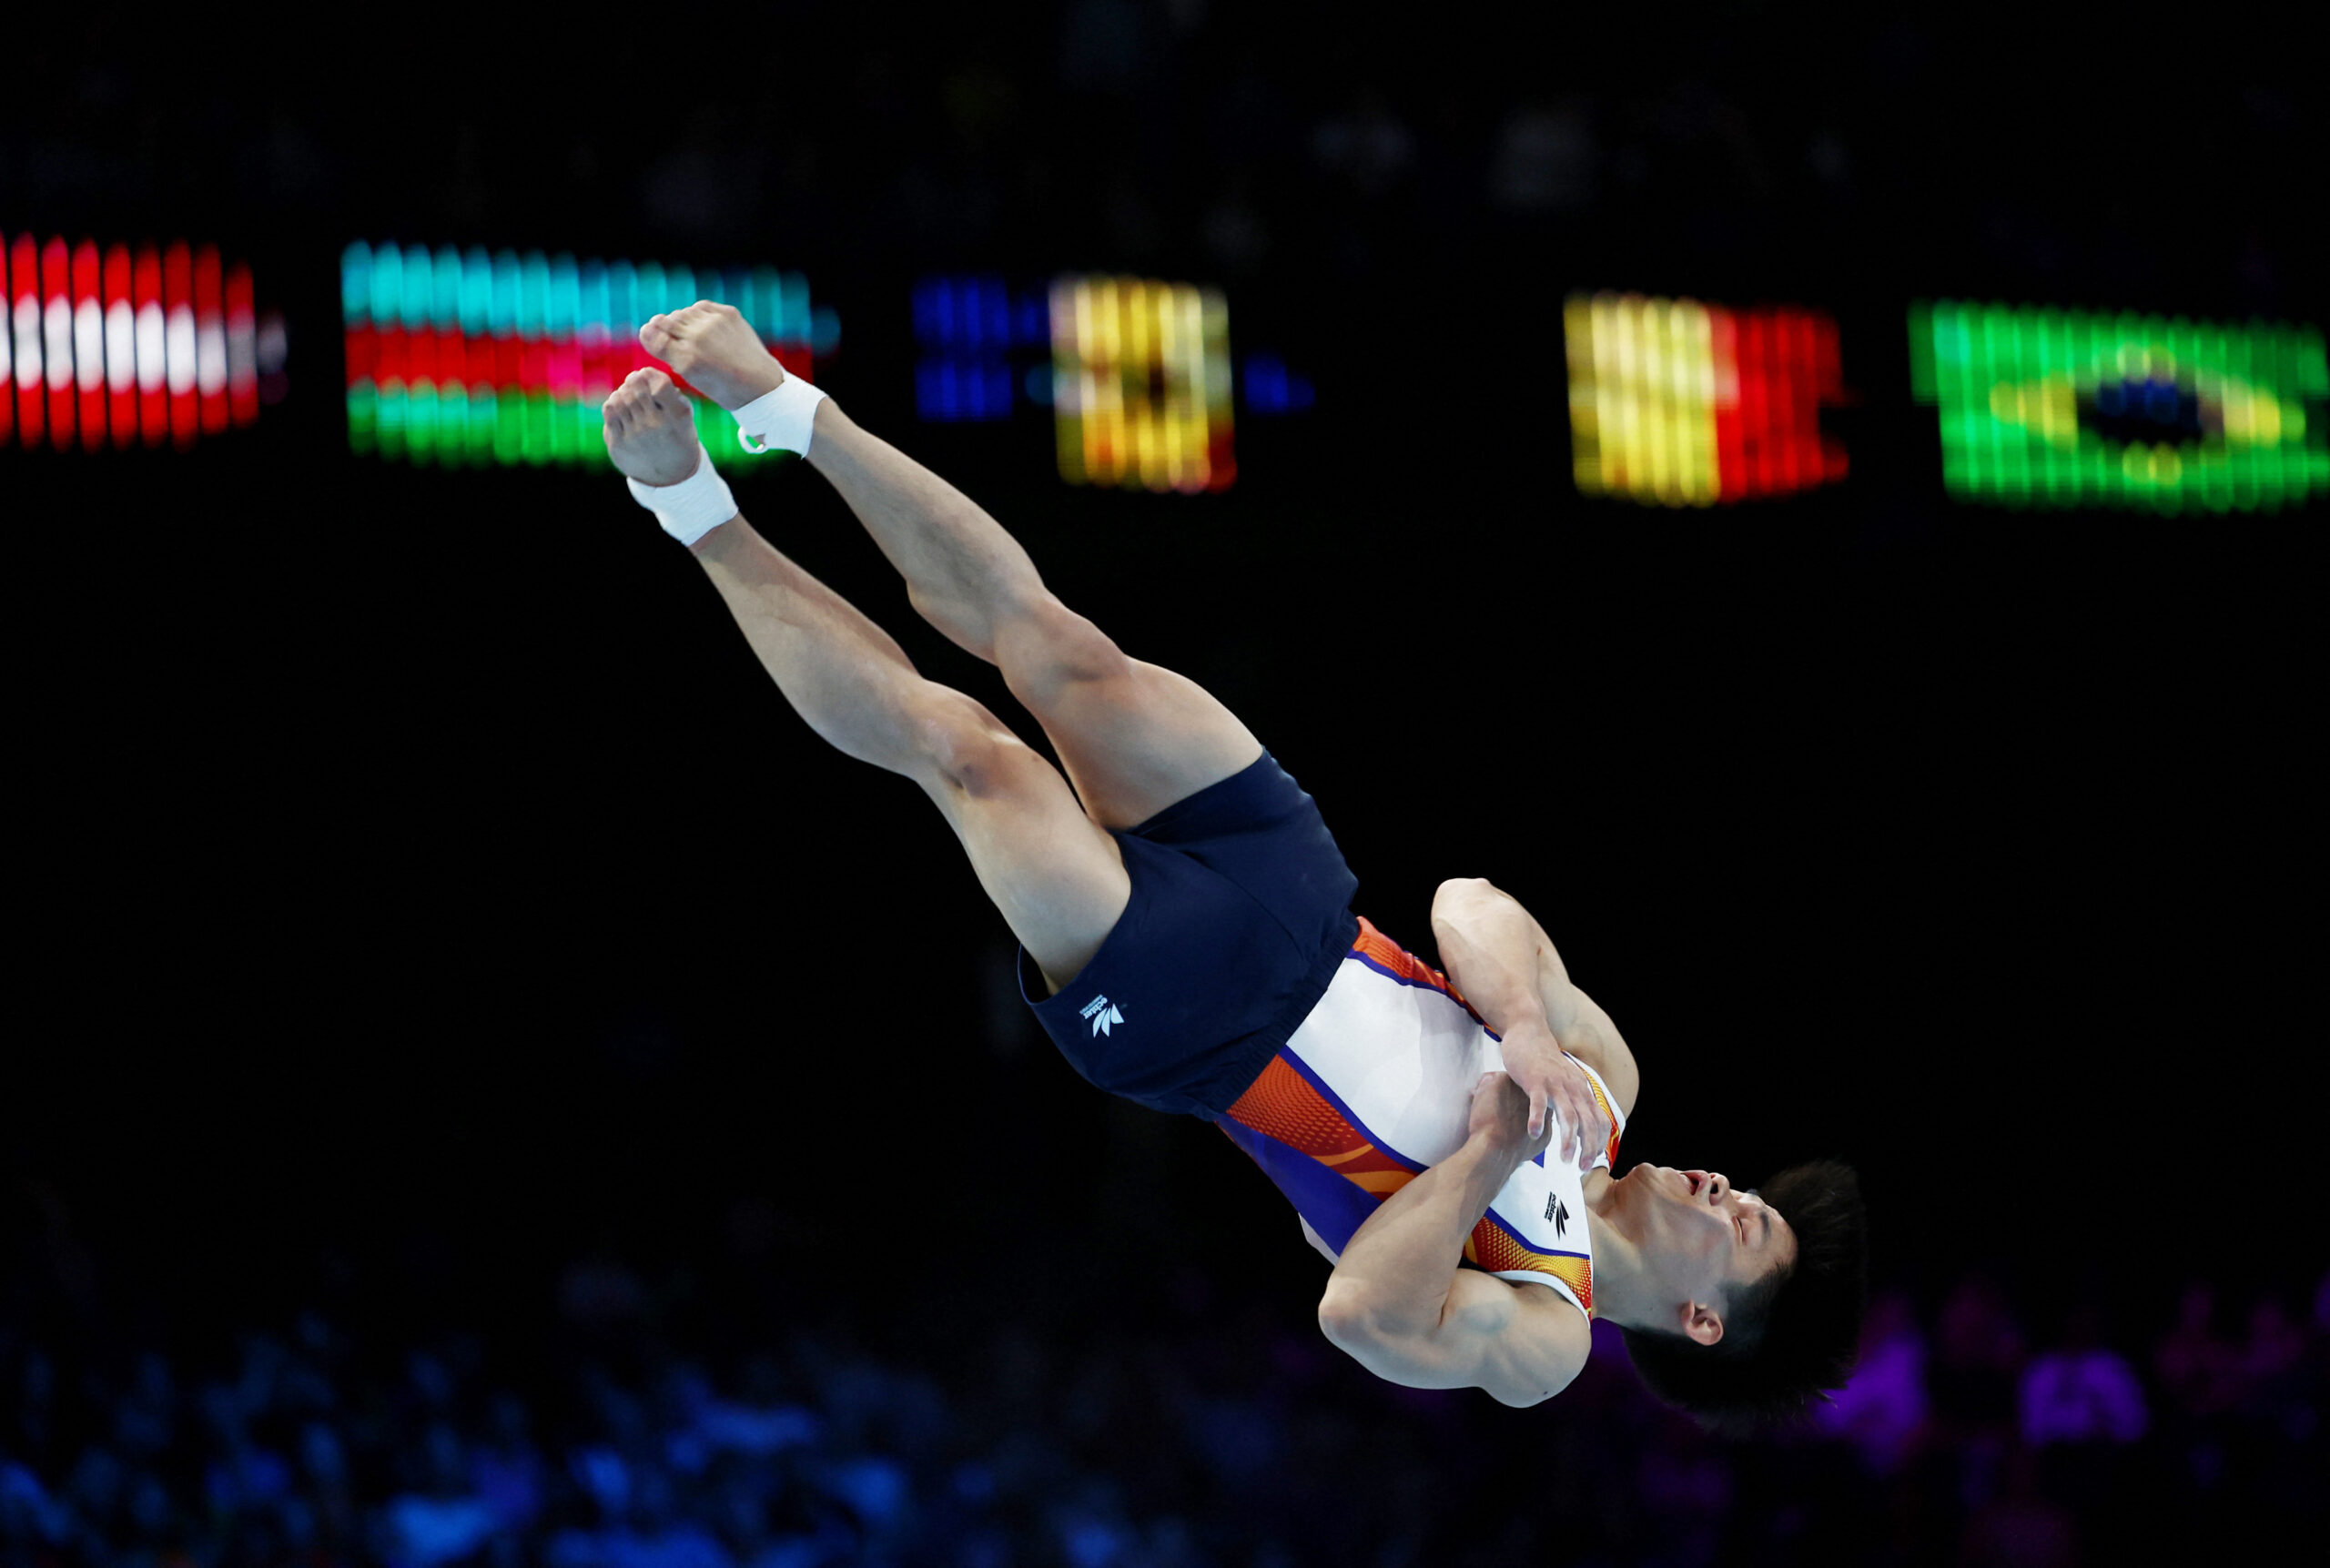 Philippines' Carlos Edriel Yulo in action on the floor during the men's apparatus finals